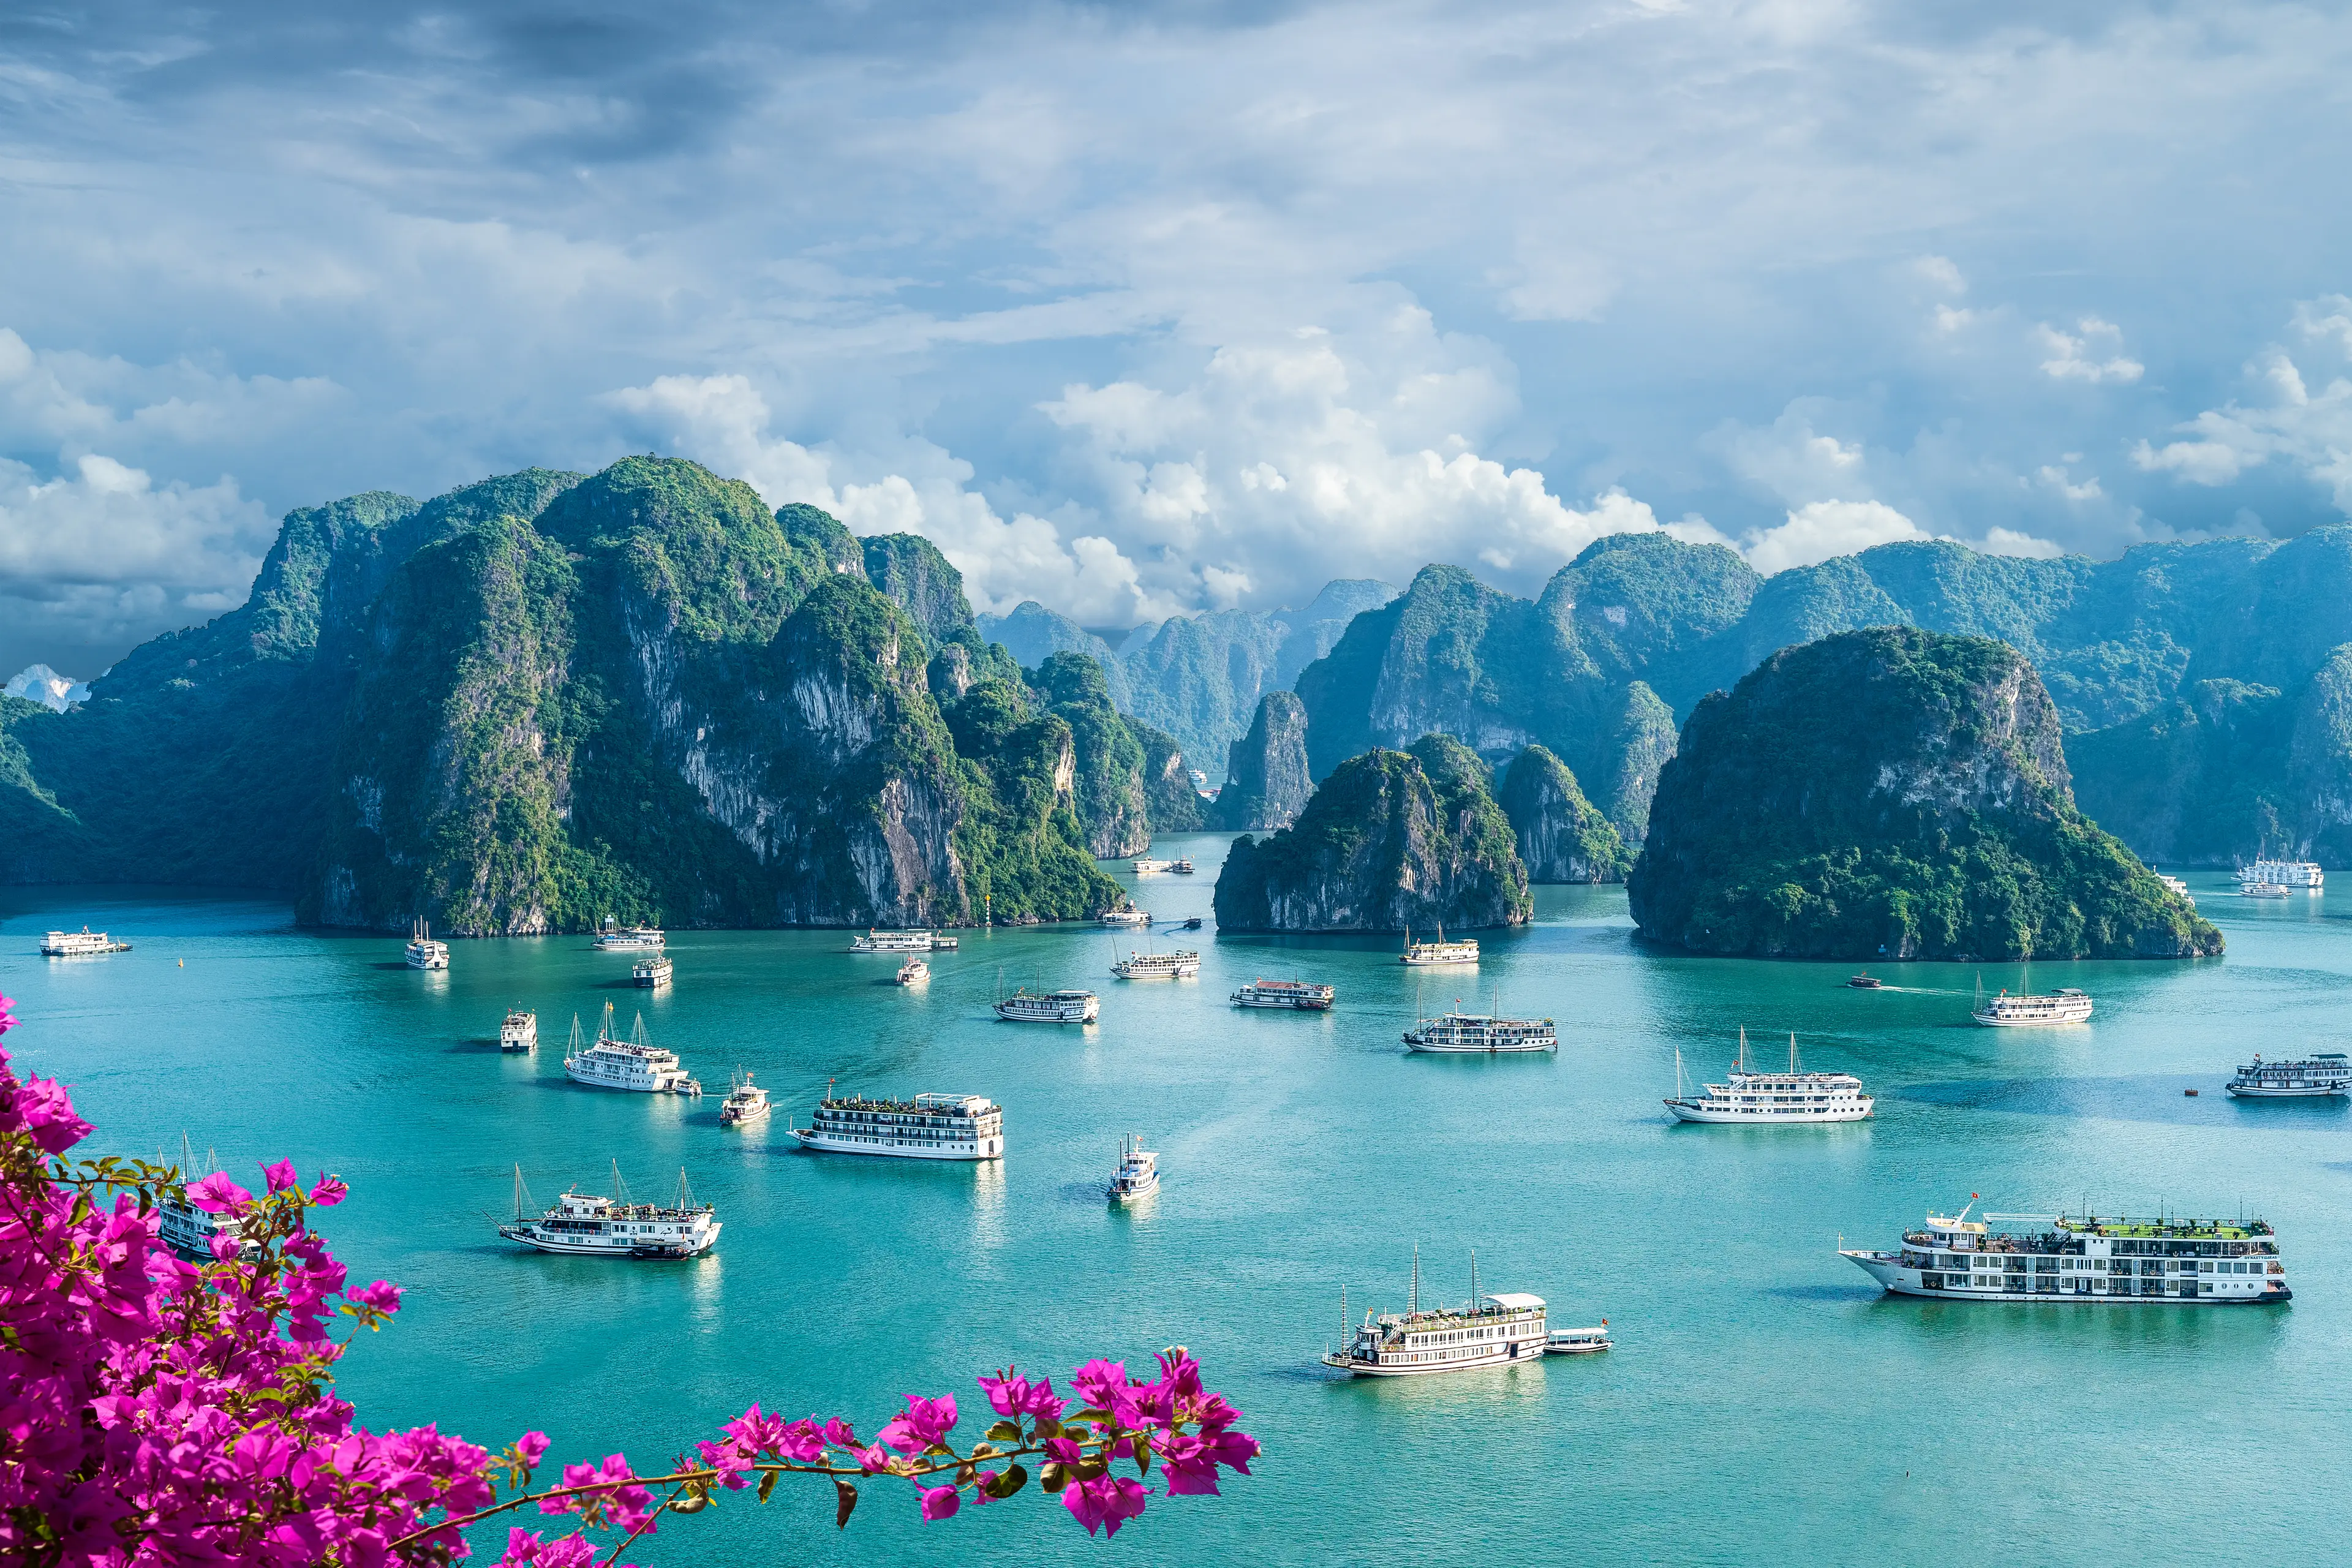 3-Day Solo Adventure and Sightseeing in Ha Long Bay, Vietnam